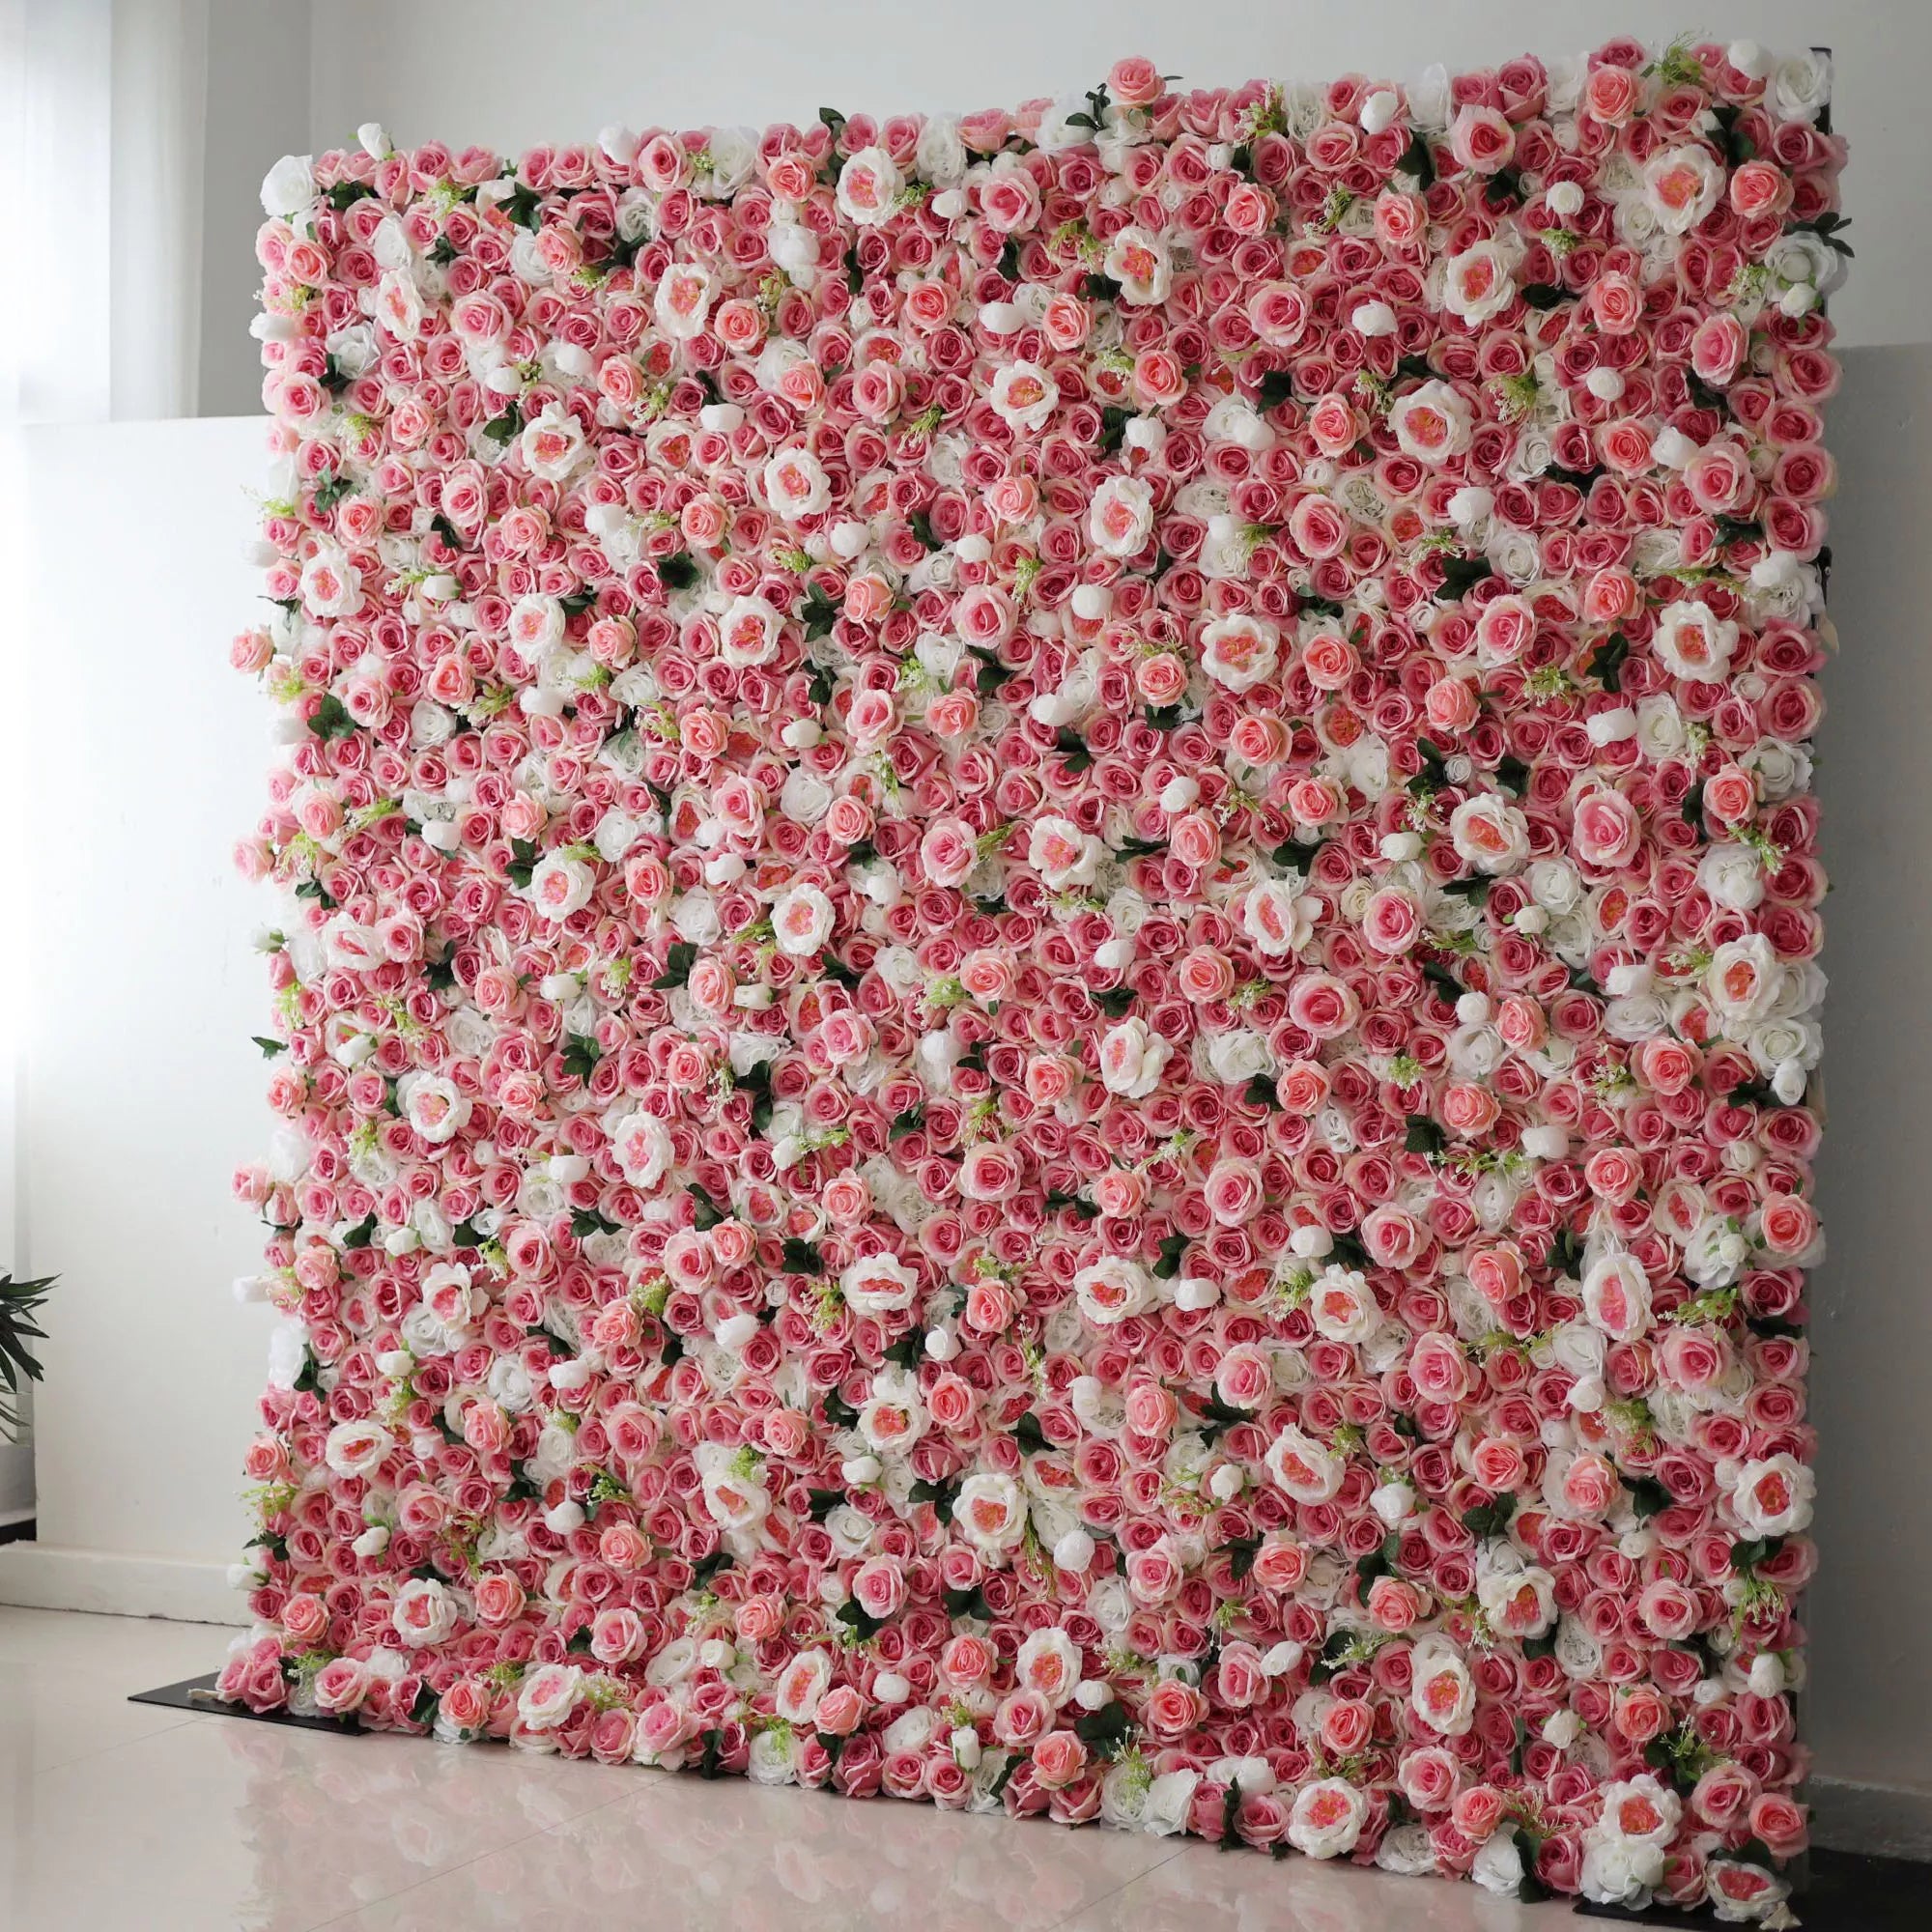 Valar Flowers' Artificial Fabric Flower Wall is a radiant sea of rosy elegance. From blush to fuchsia, punctuated by white roses, it's the epitome of timeless charm, turning any event into an unforgettable fairy tale.